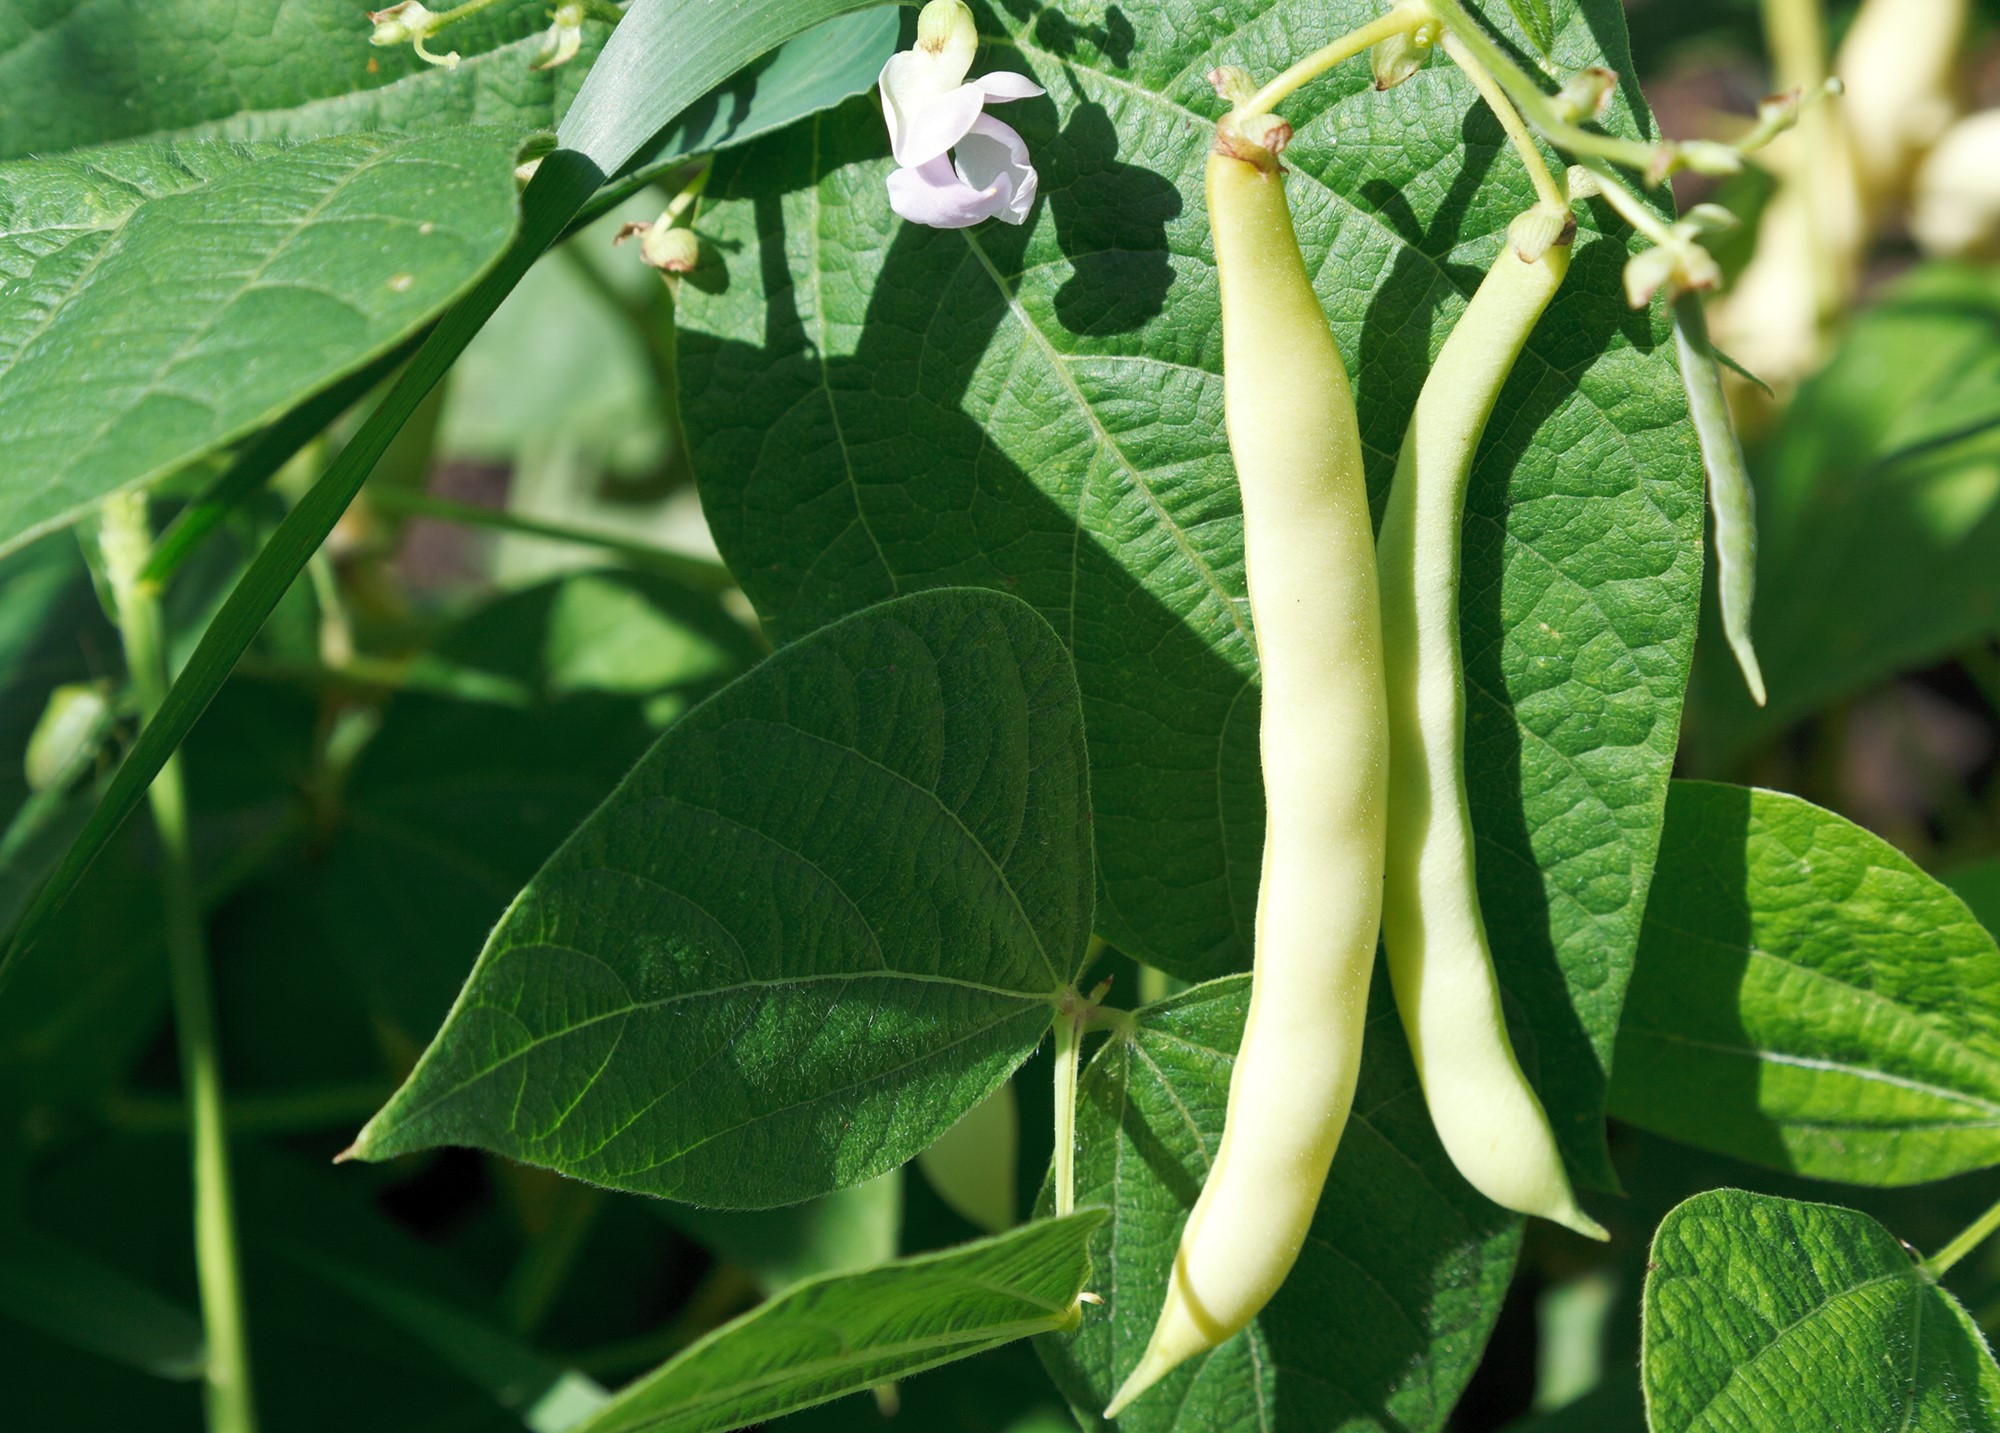 Yellow bean pods on a bean plant